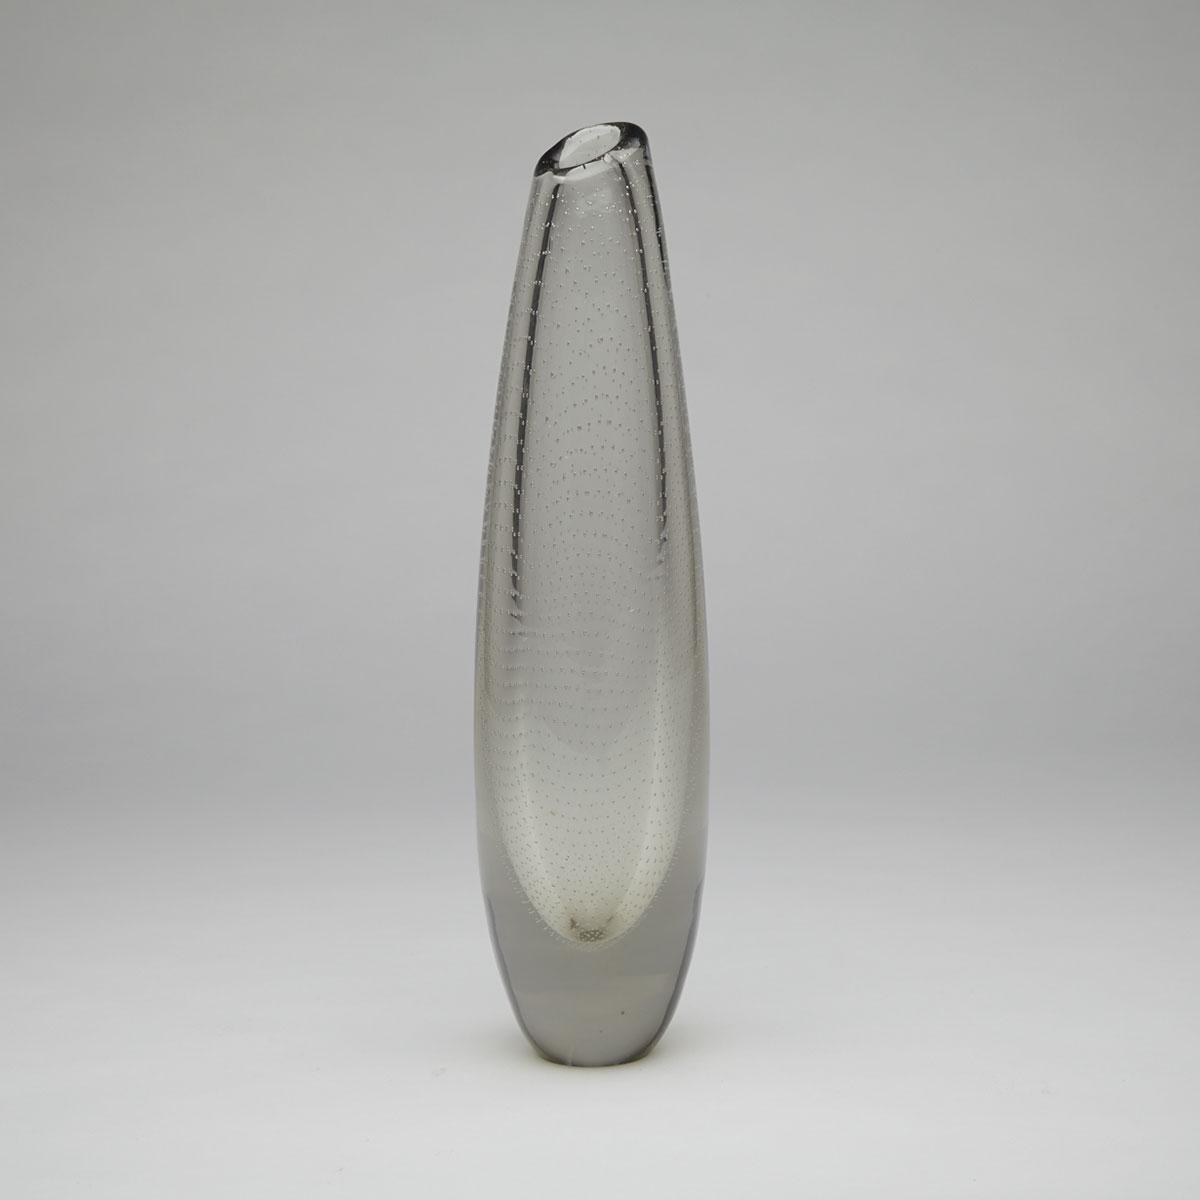 Gunnel Nyman Controlled Bubbles Glass Vase, 1948